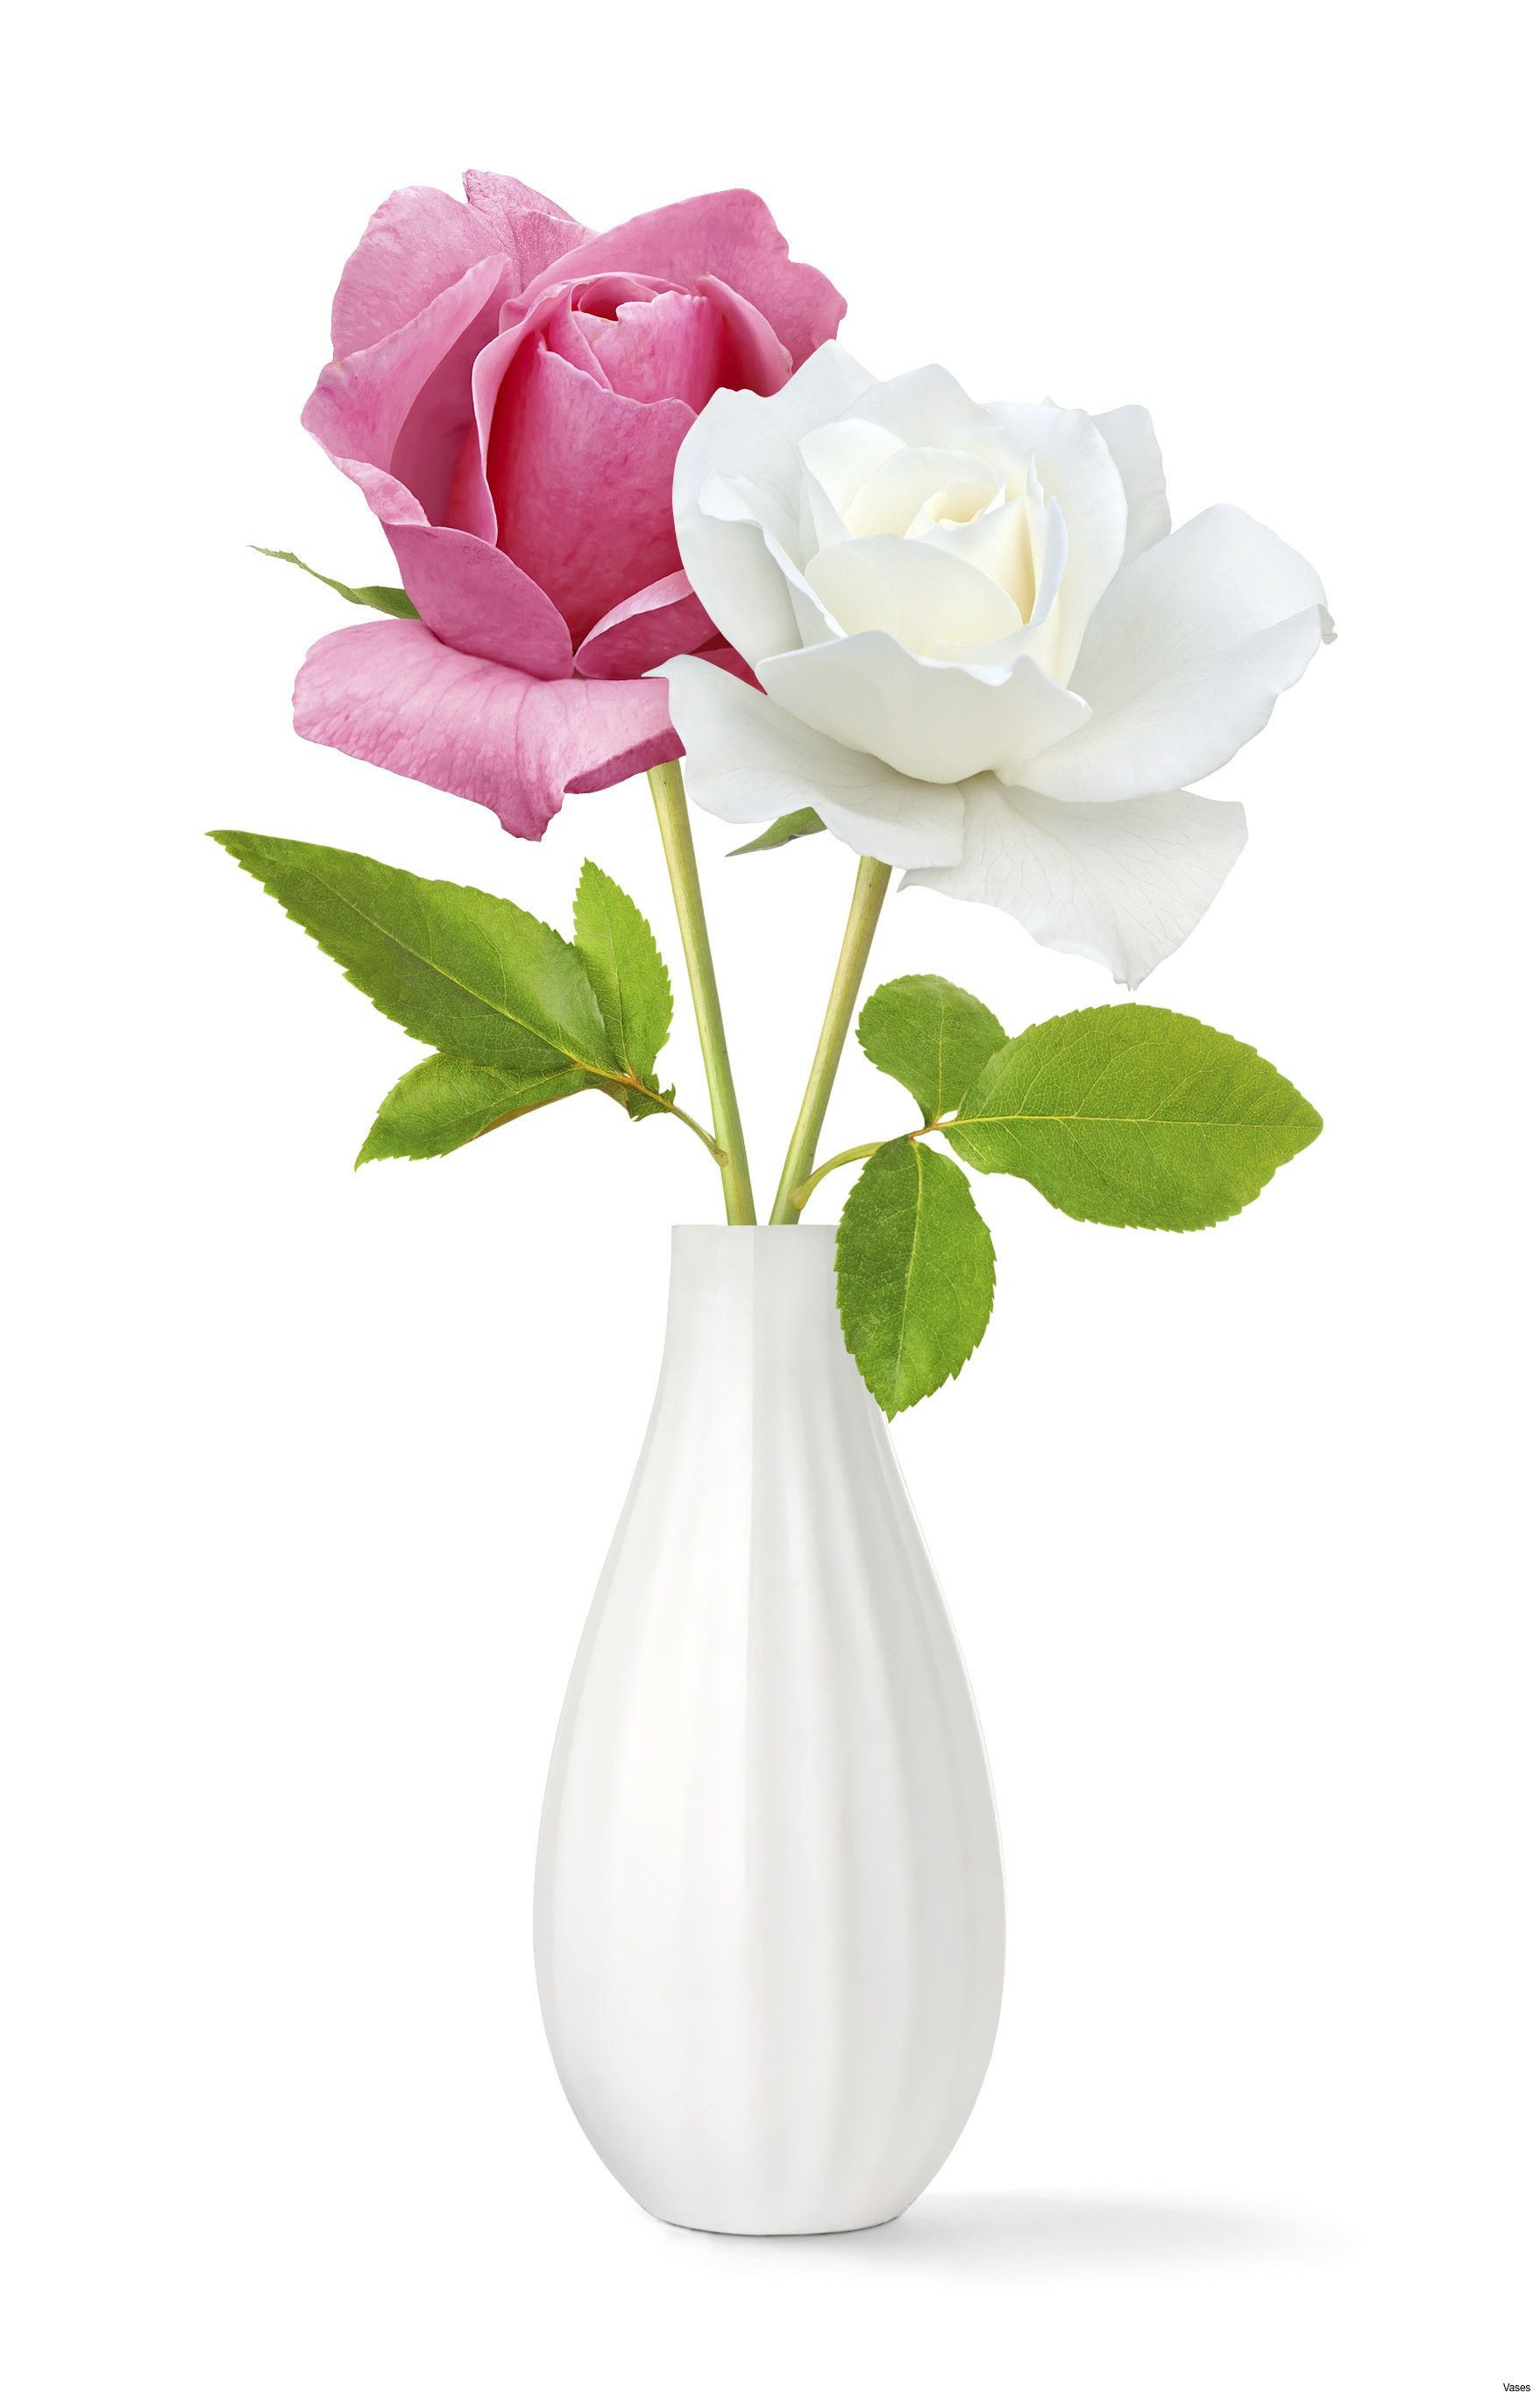 24 Great Tall Plant Vase 2024 free download tall plant vase of light pink vase elegant roses red in a vase singleh vases rose in light pink vase elegant roses red in a vase singleh vases rose single i 0d scheme